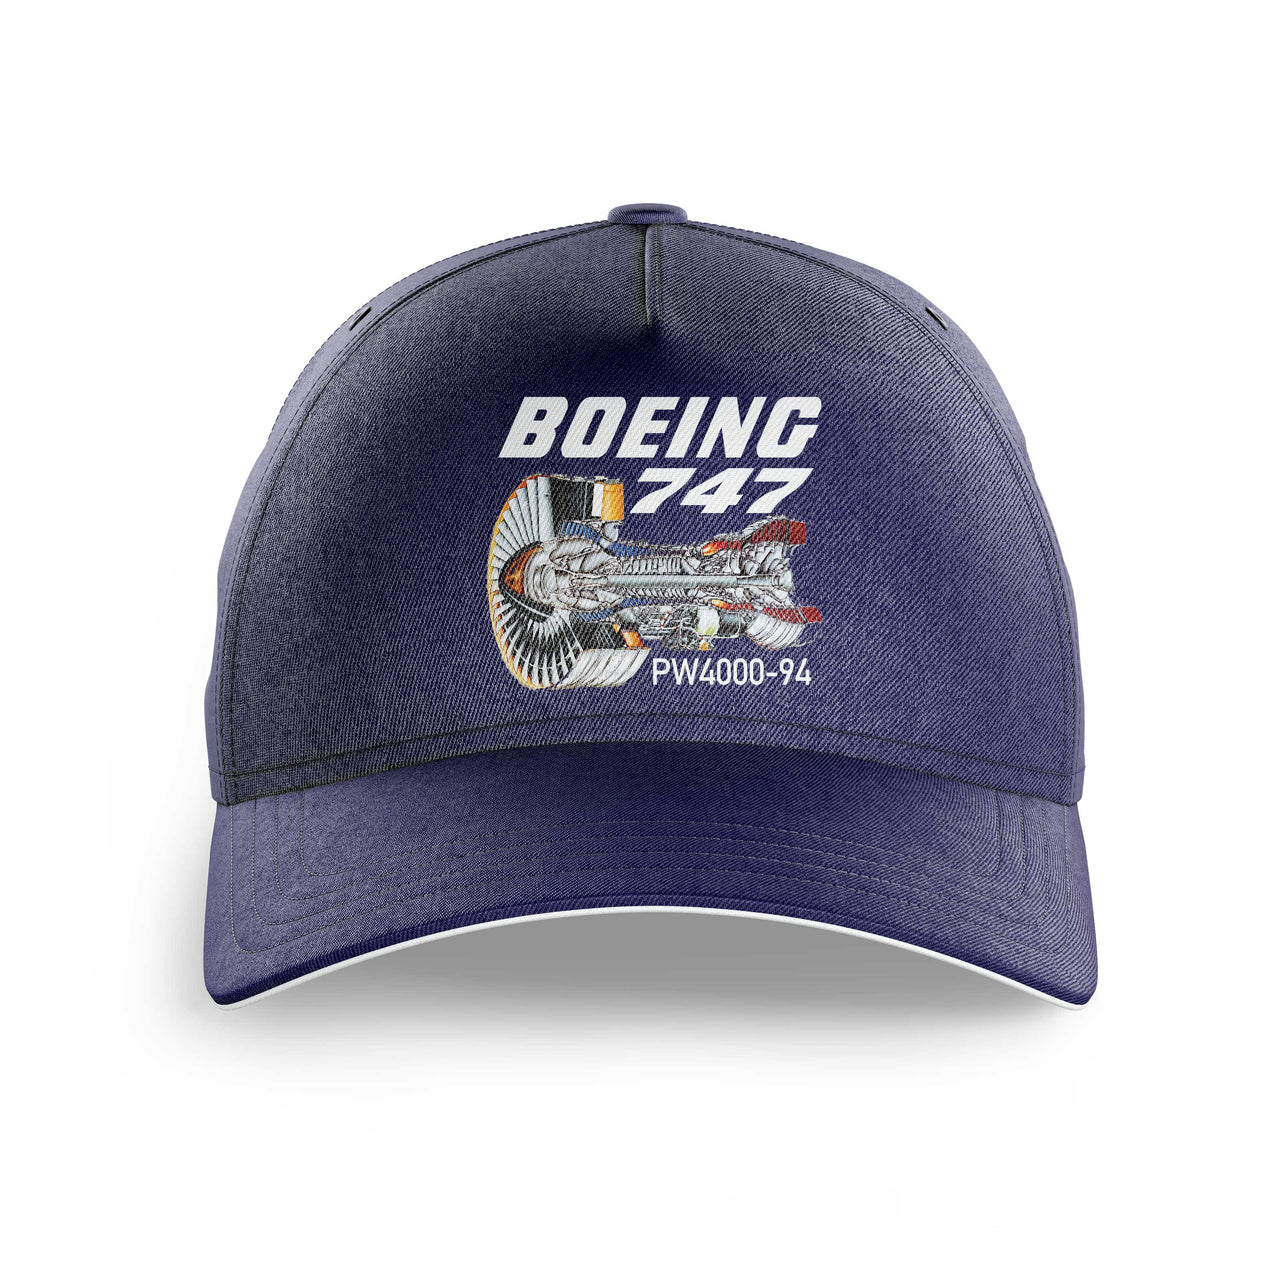 Boeing 747 & PW4000-94 Engine Printed Hats